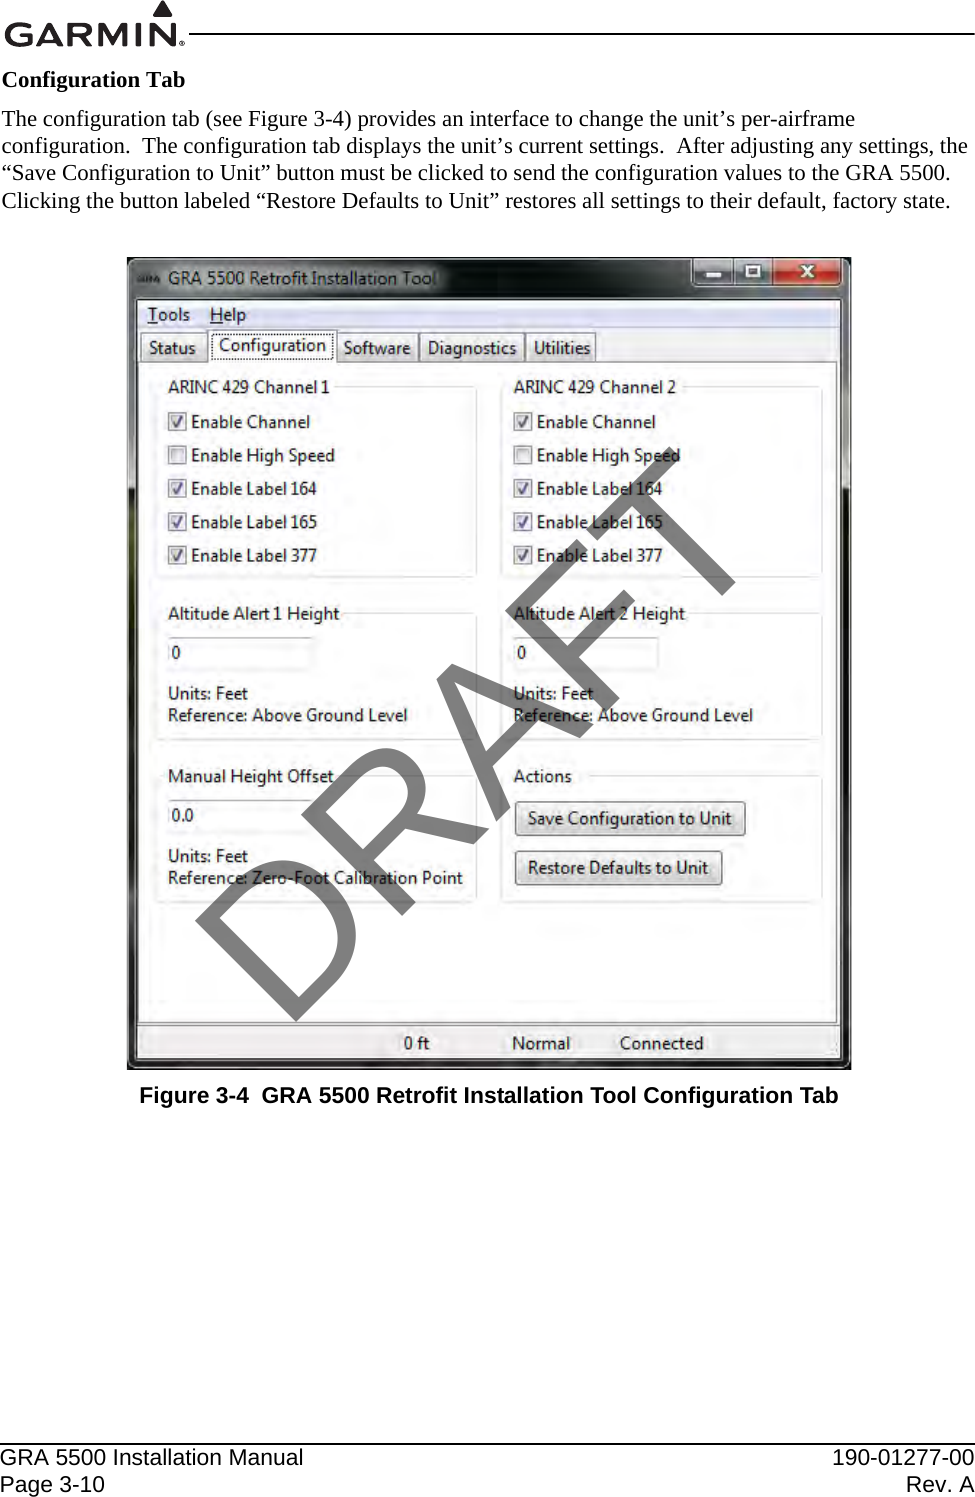 GRA 5500 Installation Manual 190-01277-00Page 3-10 Rev. AConfiguration TabThe configuration tab (see Figure 3-4) provides an interface to change the unit’s per-airframe configuration.  The configuration tab displays the unit’s current settings.  After adjusting any settings, the “Save Configuration to Unit” button must be clicked to send the configuration values to the GRA 5500.  Clicking the button labeled “Restore Defaults to Unit” restores all settings to their default, factory state.Figure 3-4  GRA 5500 Retrofit Installation Tool Configuration TabDRAFT